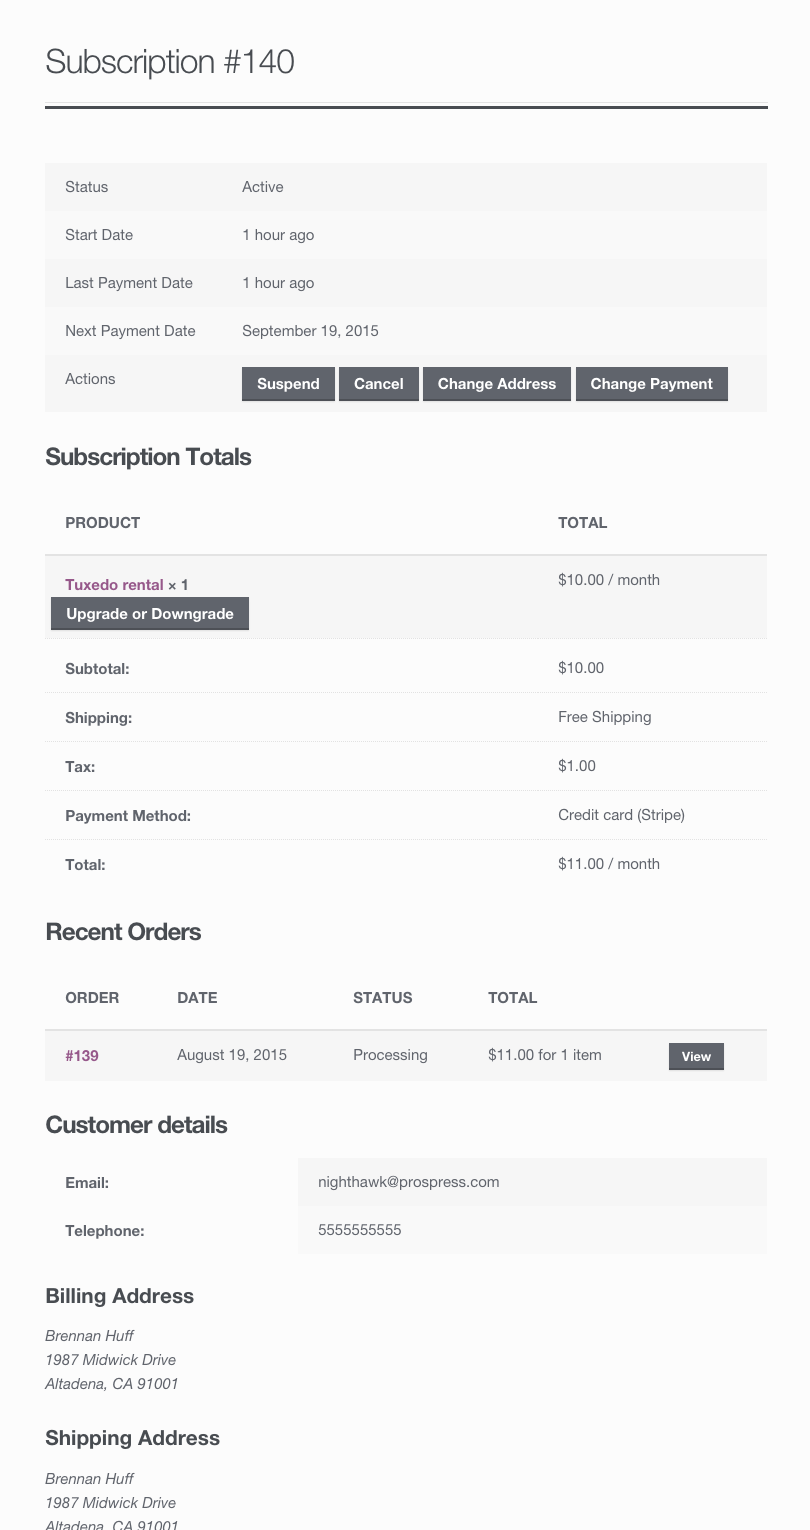 View Subscription Page